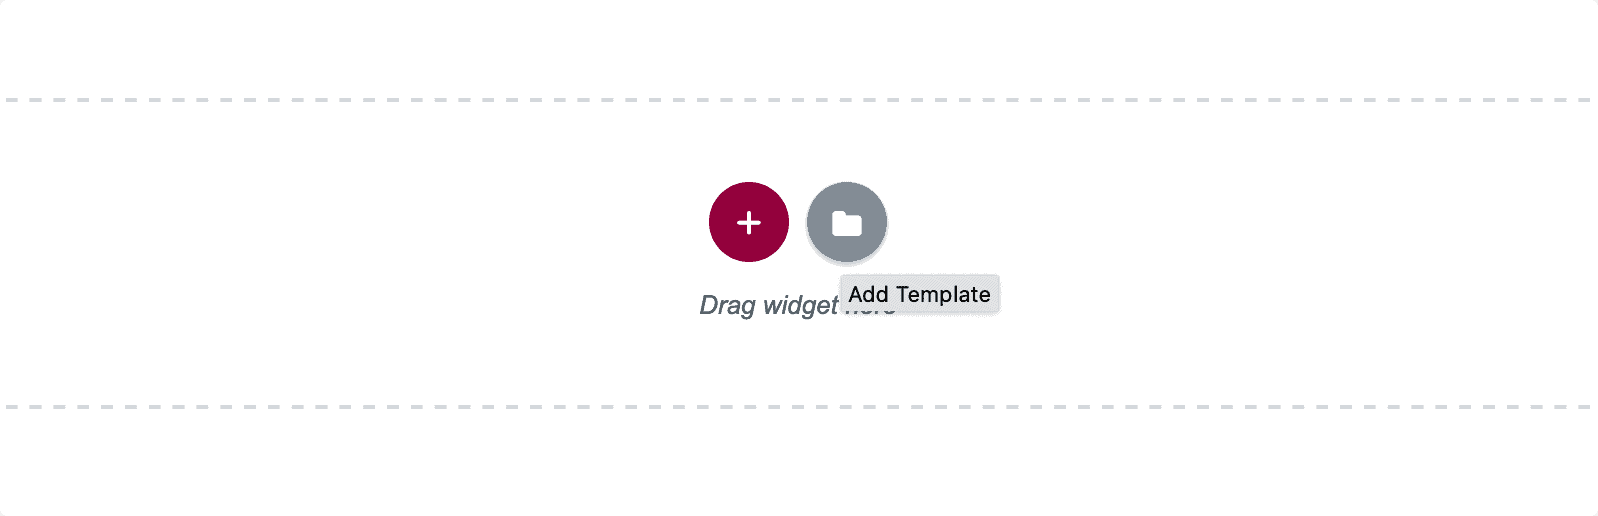 The Add Template icon.